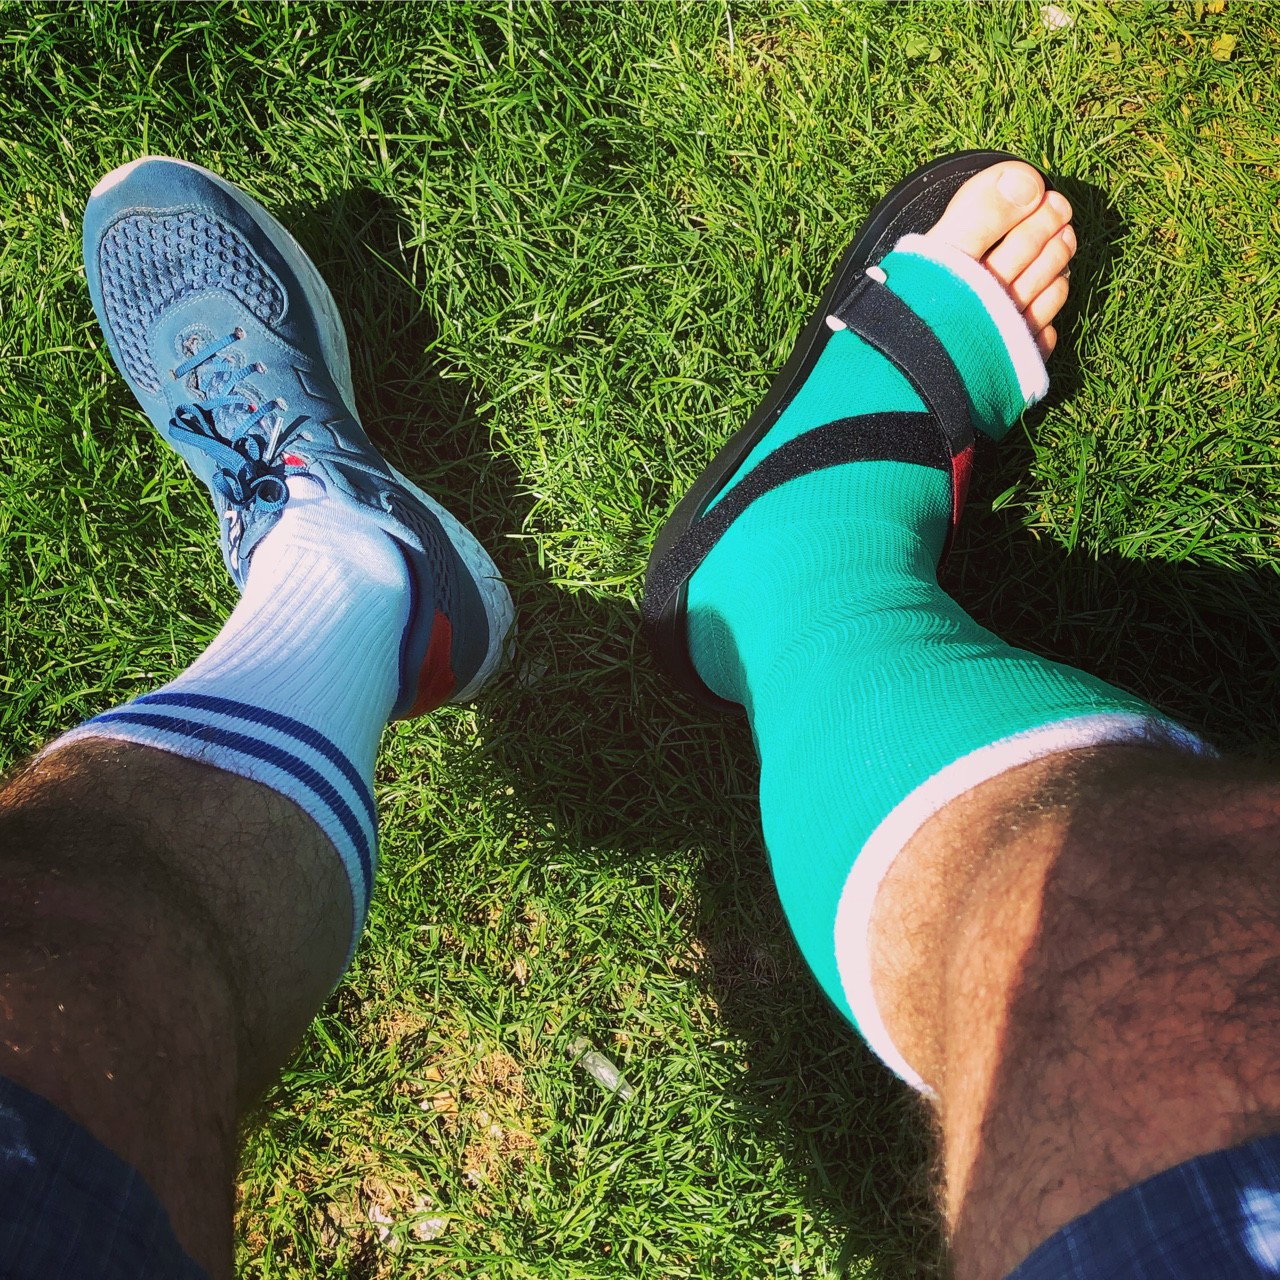 Watch the Photo by ampstef with the username @ampstef, posted on June 29, 2018 and the text says 'castmande:

Fresh green #brokenleg #brokenfoot #brokenankle #gayfetish #gipsbein #gips #gesso #yeso #legcast'